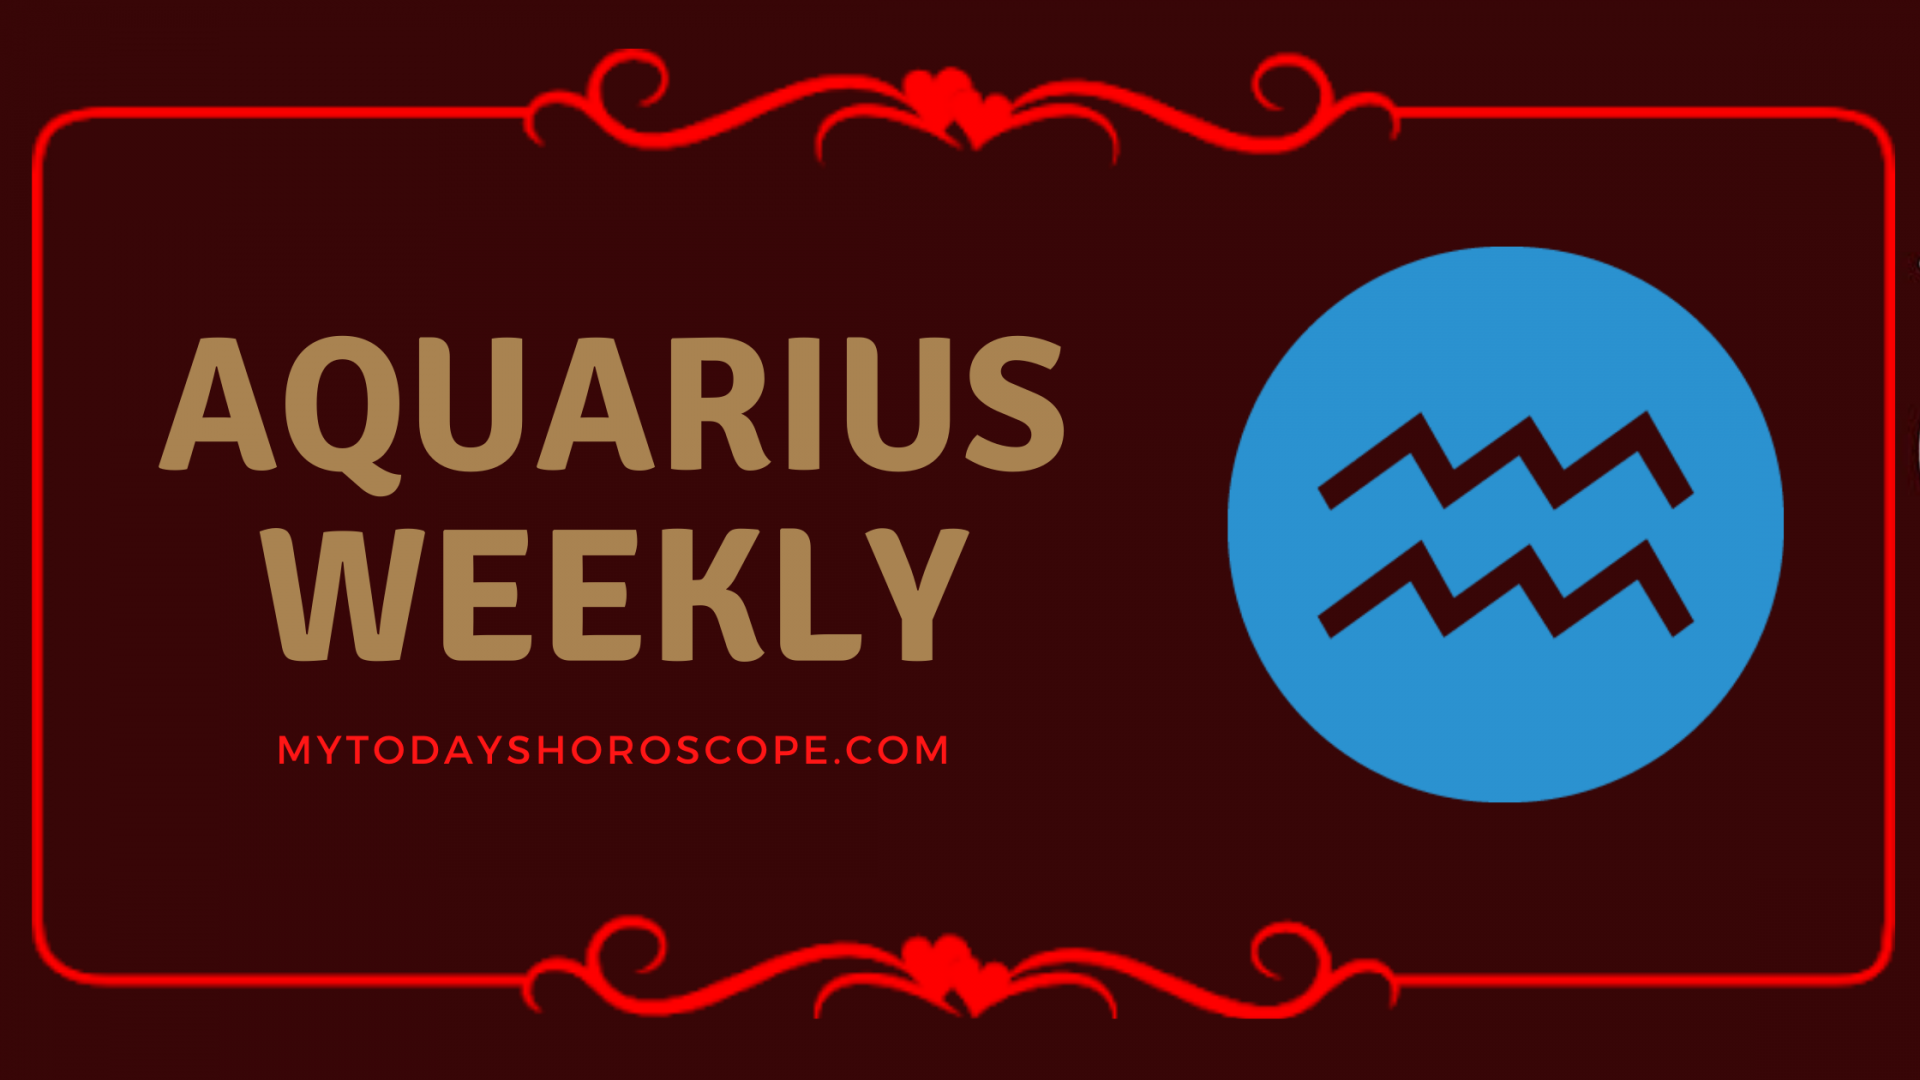 AQUARIUS Weekly Horoscope (January 25-31) - Best Prediction for Love, Money, Career and Health